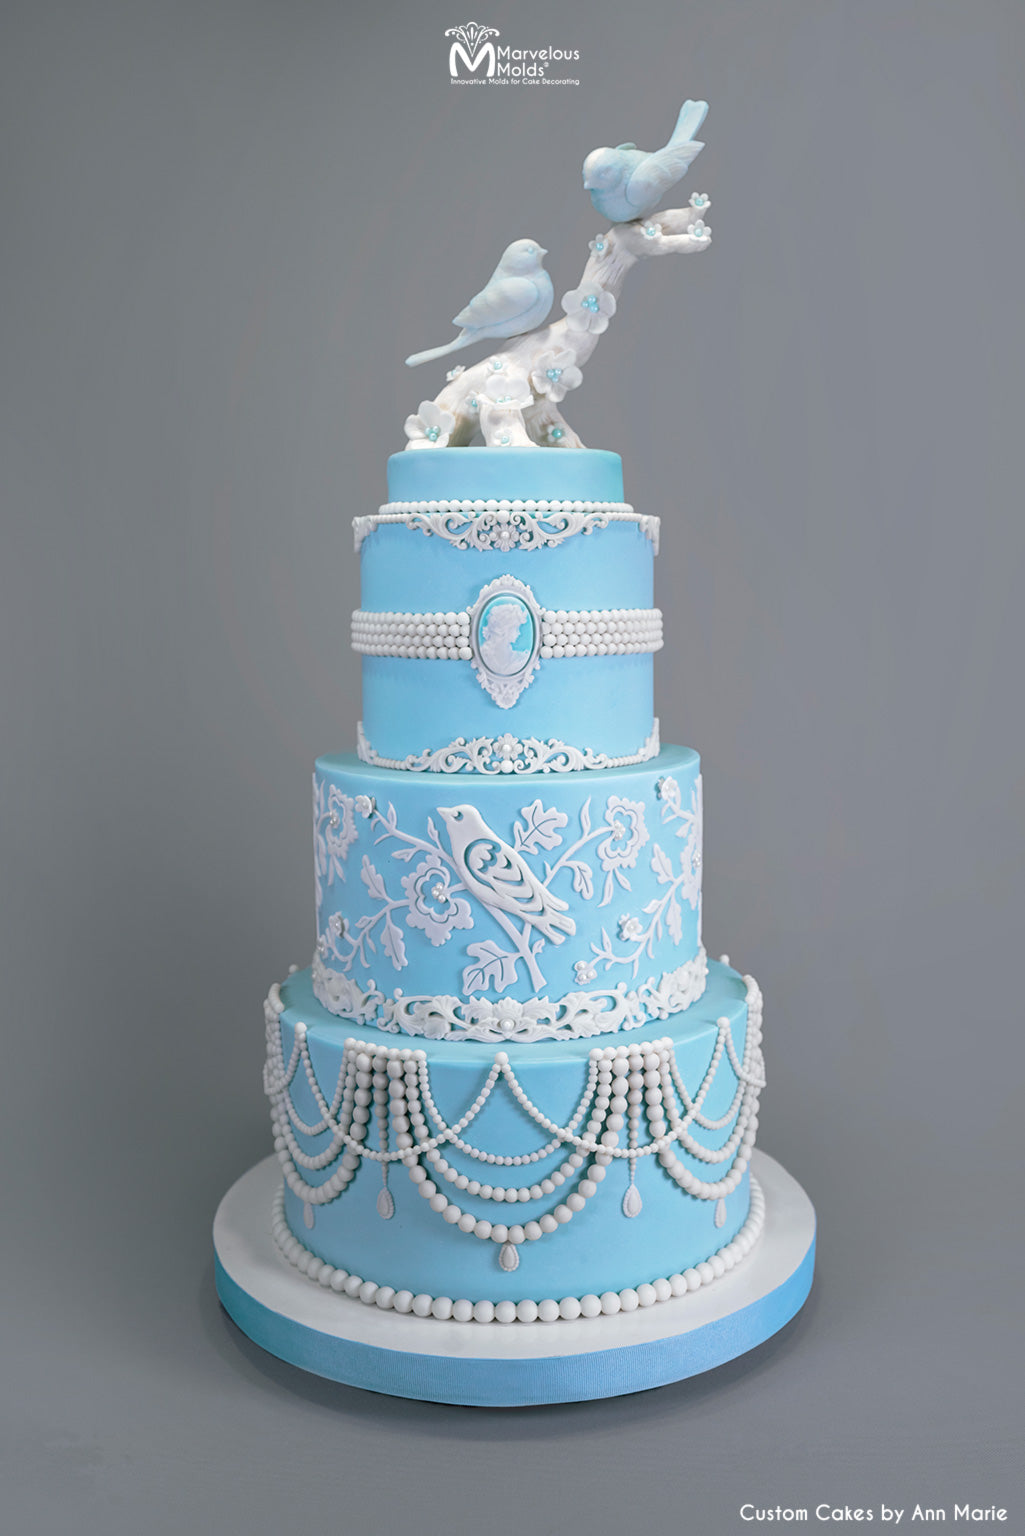 Light Blue Floral Cake Decorated with Pearl Strings and Lace Embellishments Created Using PinchPro Pearls 14mm Silicone Mold